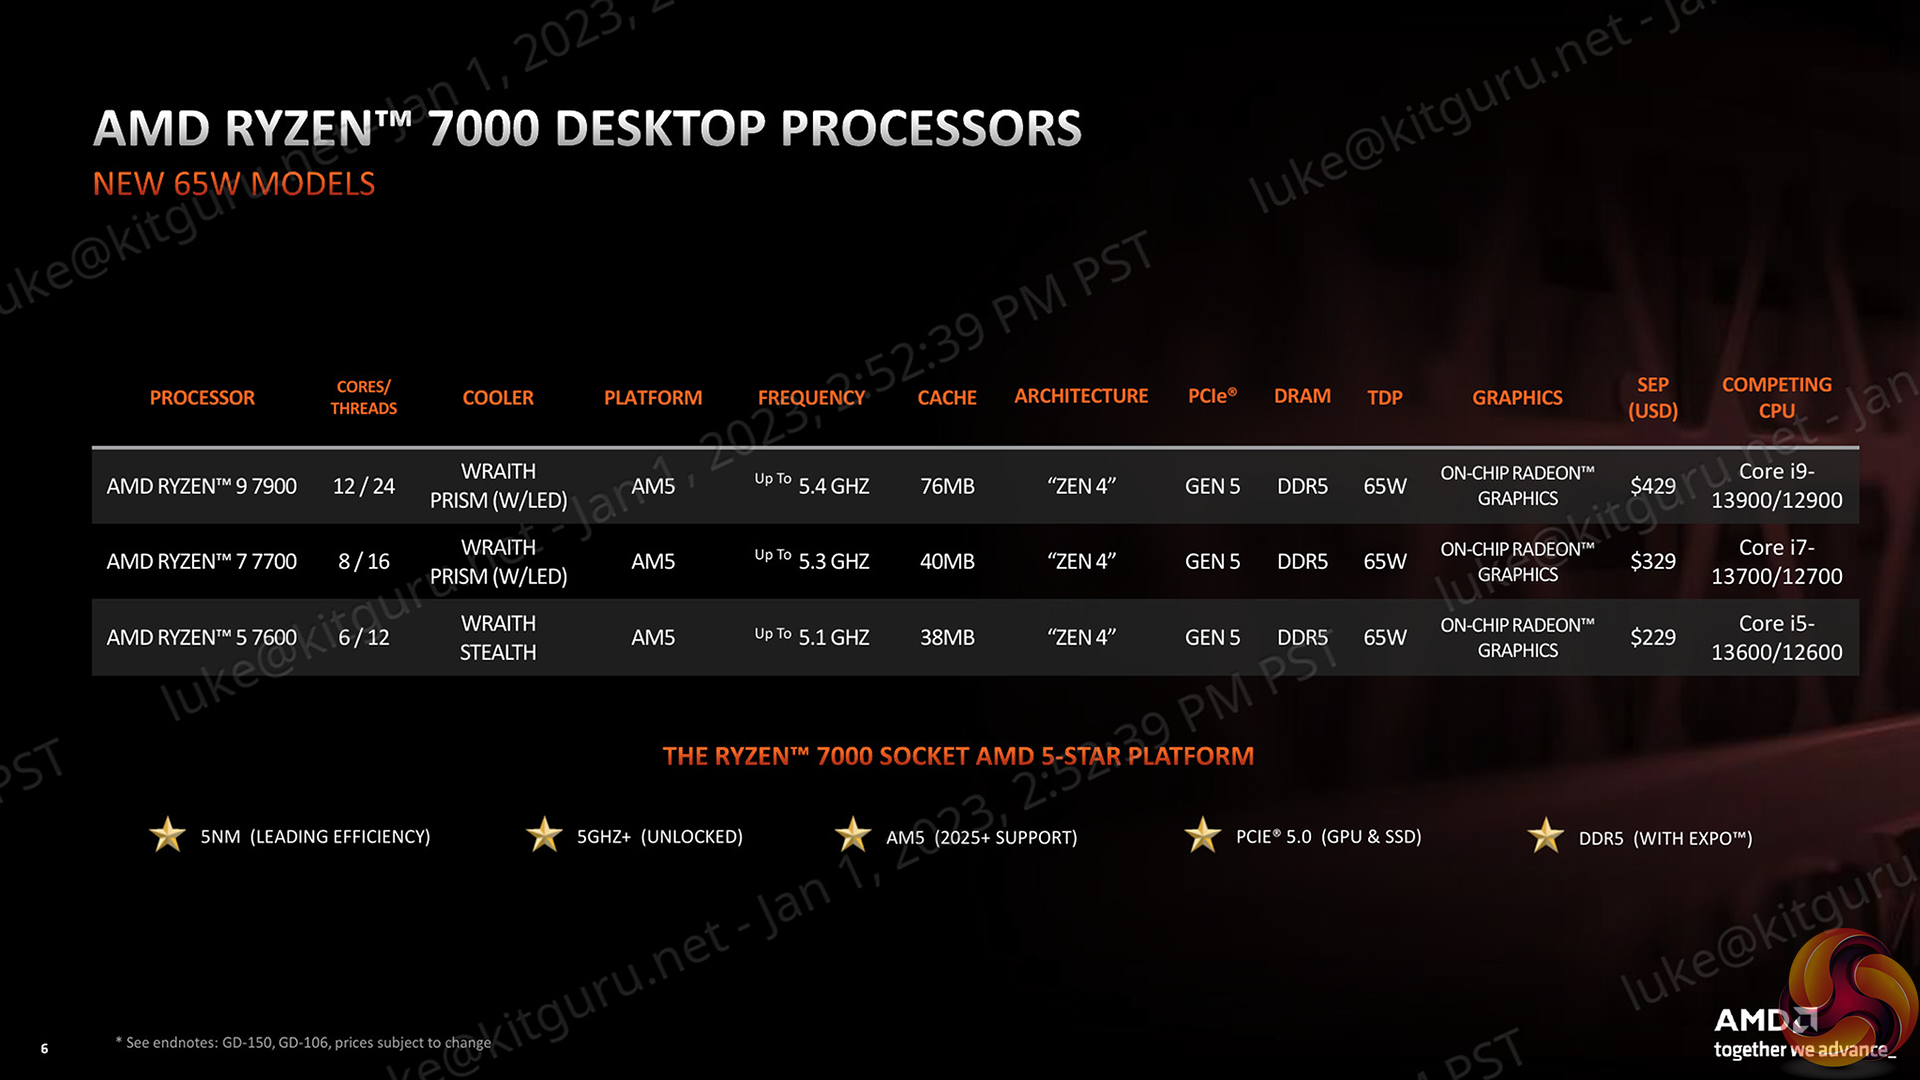 AMD Ryzen 7 7700 Reviews, Pros and Cons